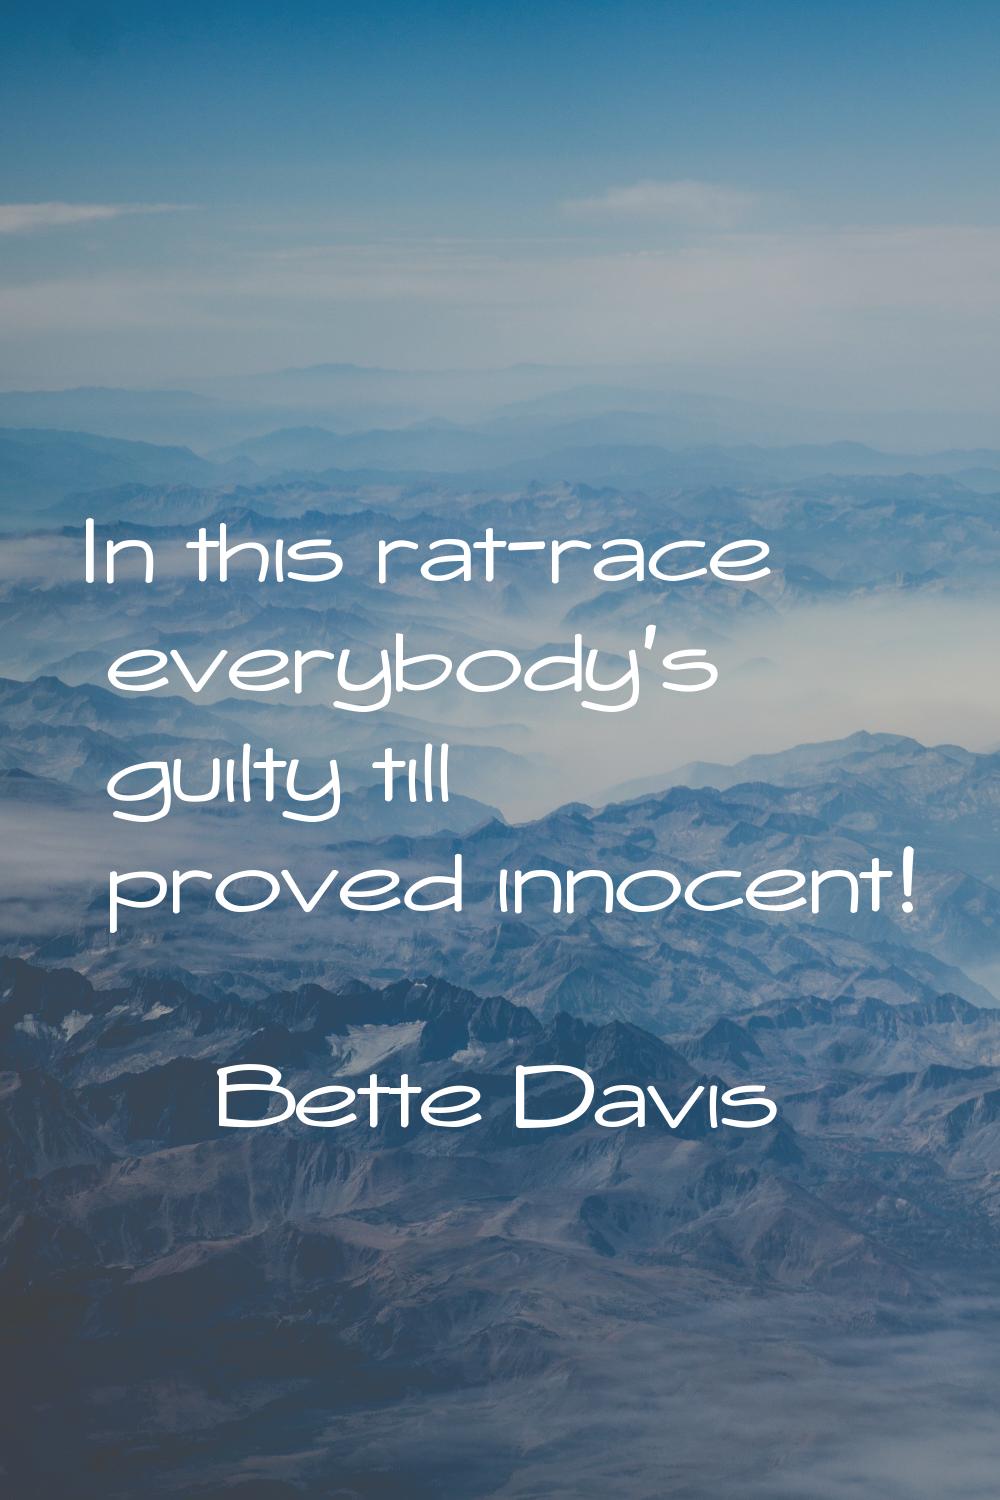 In this rat-race everybody's guilty till proved innocent!